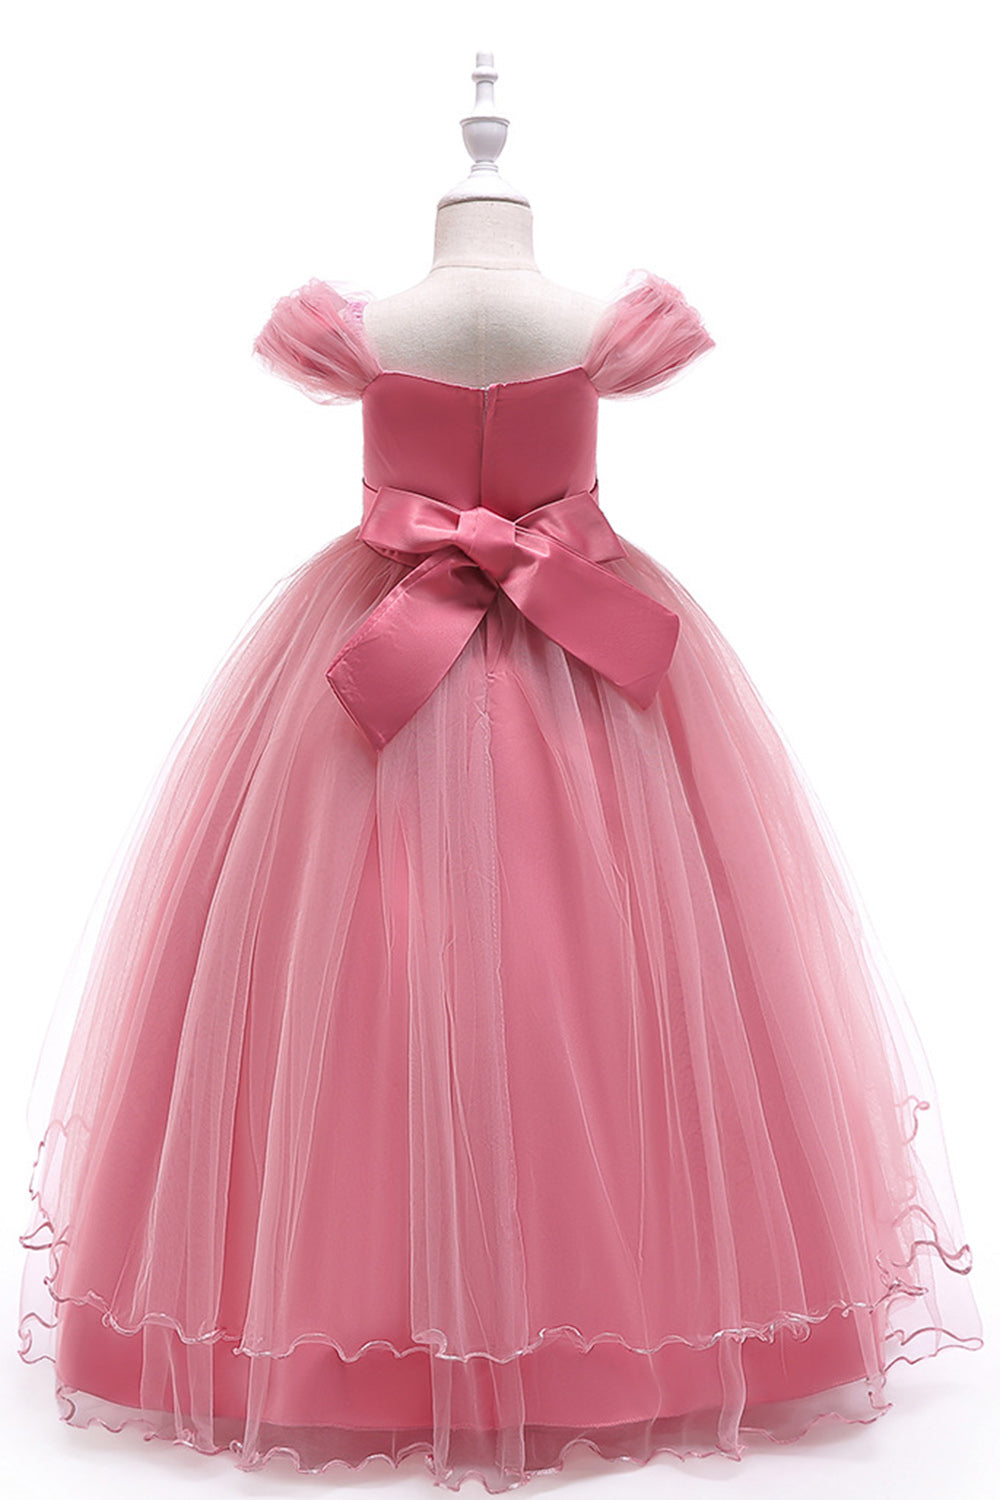 A-Line Beaded Blush Girls Dresses with Appliques